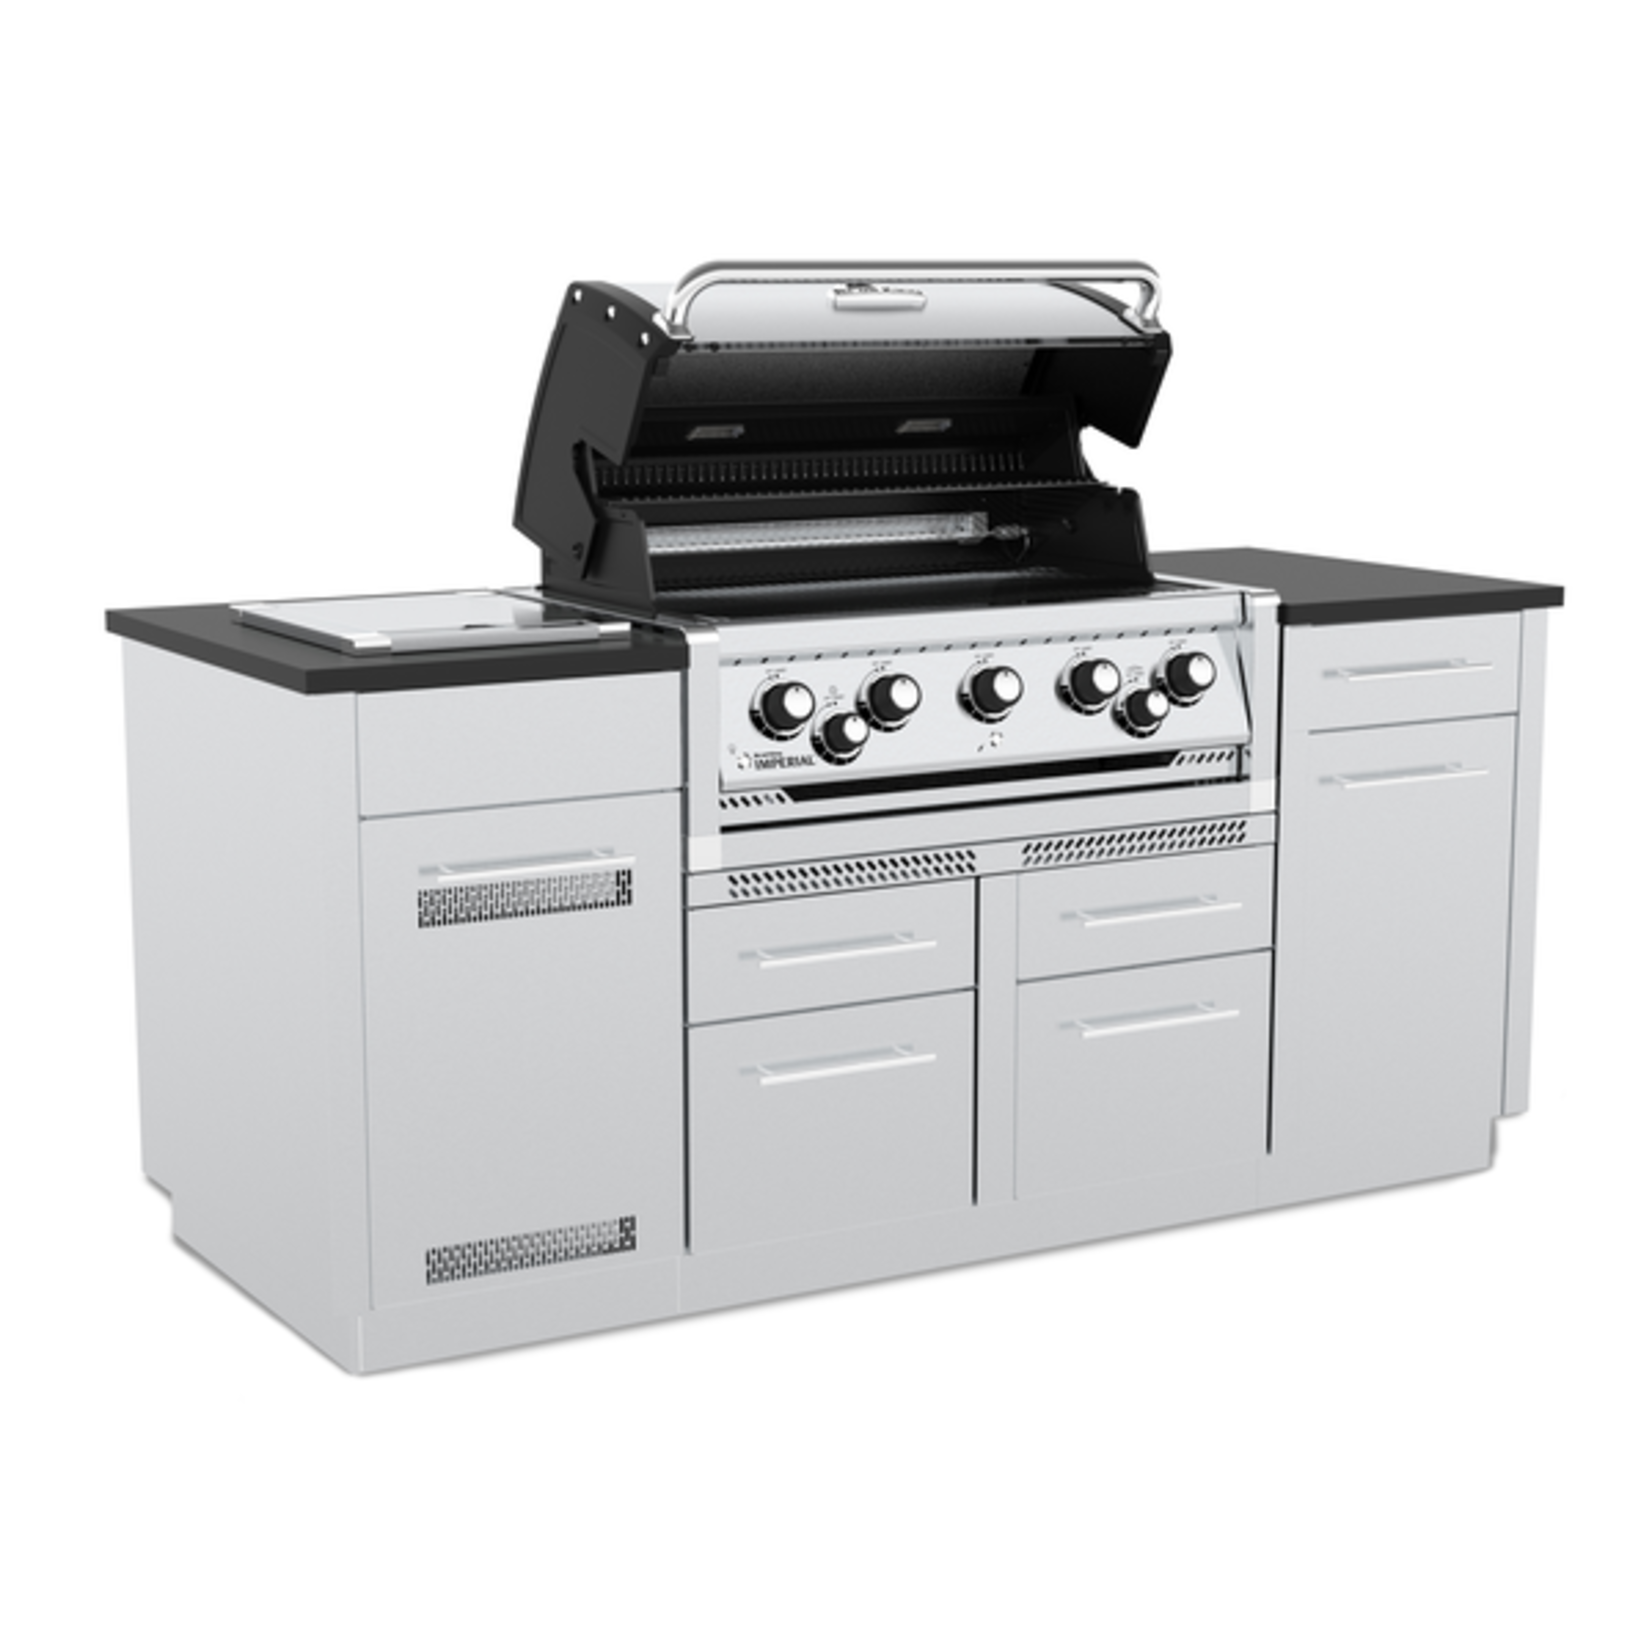 Broil King Broil King Imperial S 590i NG